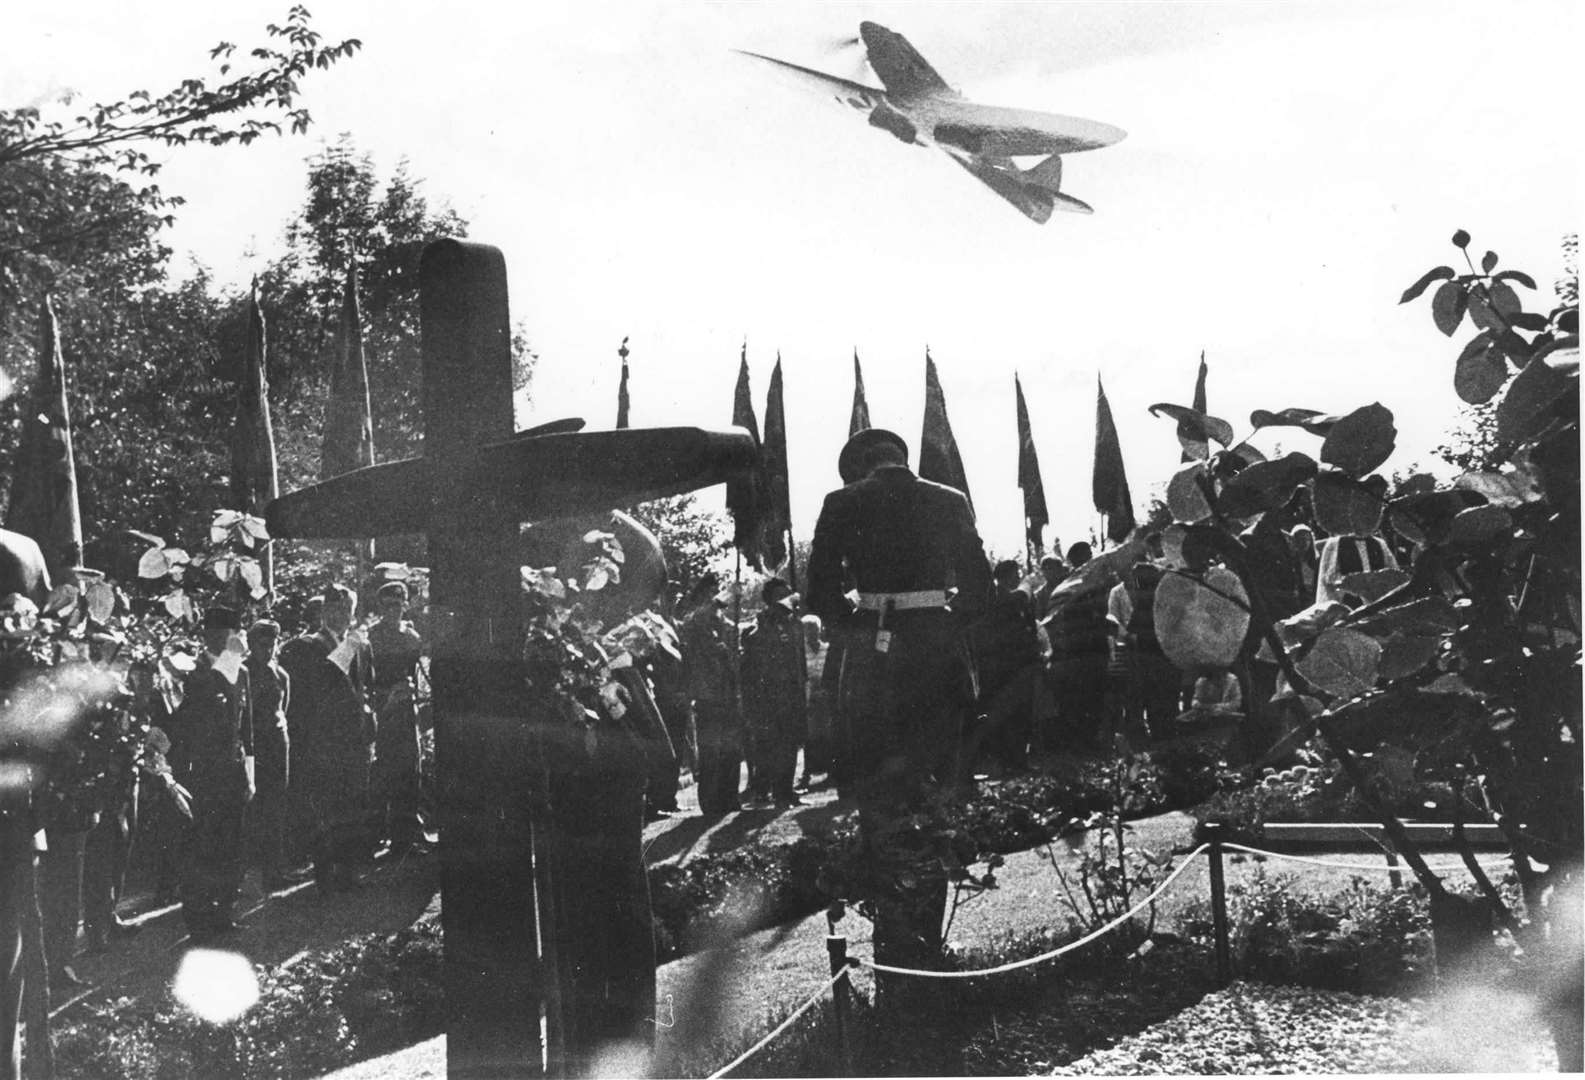 A scene from the memorial service held in 1979